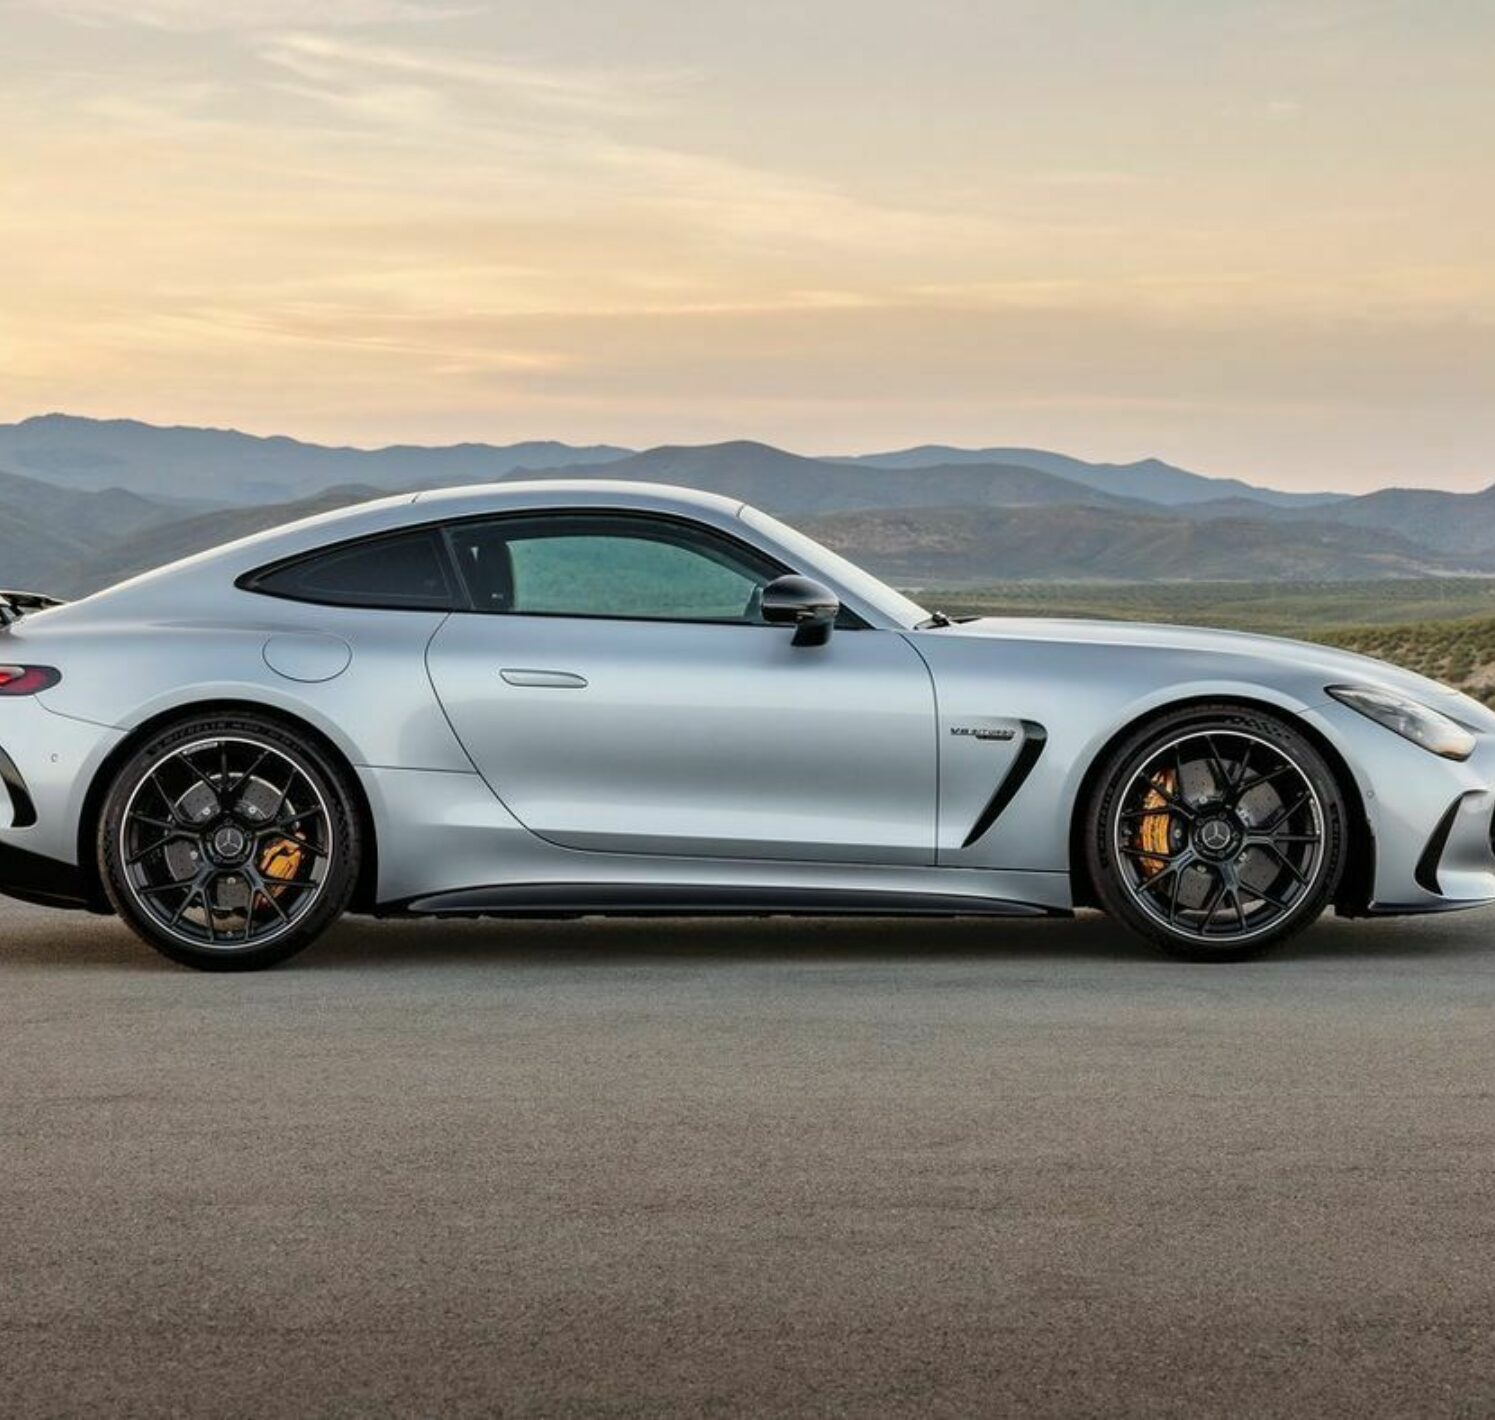 https://autofilter.sk/assets/images/amg-gt-kupe/gallery/mercedes-amg-gt-coupe-4-galeria.jpg - obrazok